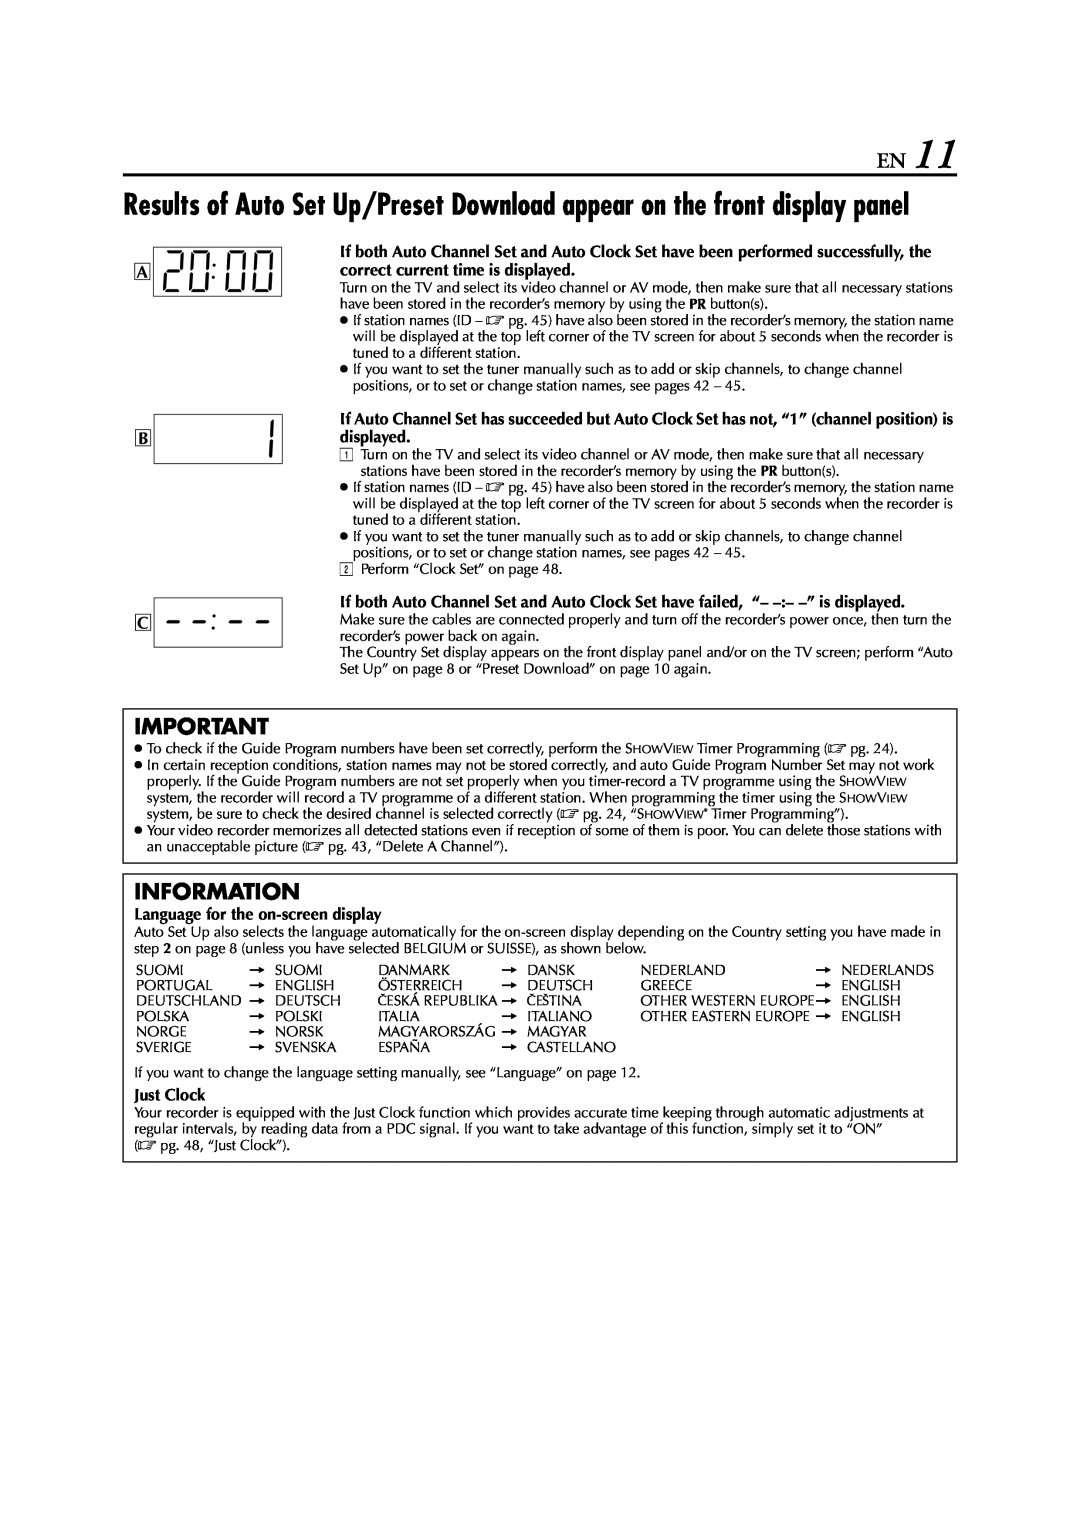 JVC HR-J674EU instruction manual Information, Language for the on-screen display, Just Clock 